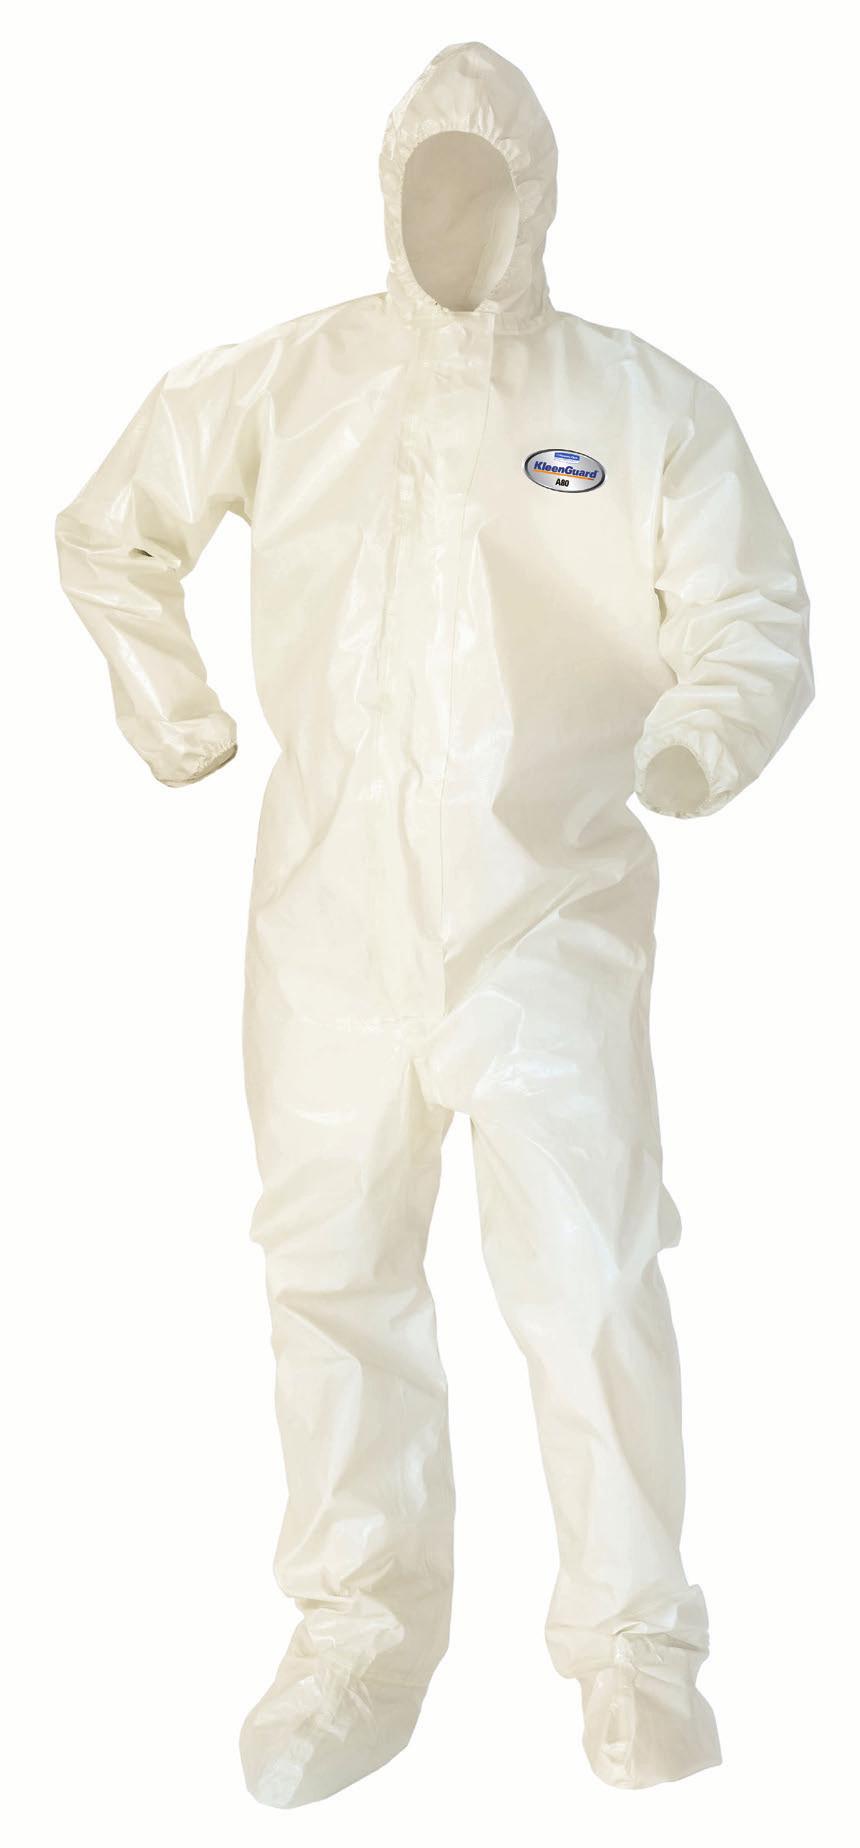 A80 Chemical Permeation & Jet iquid Protection Apparel KEENGUARD* A80 evel B/C Coveralls Taped eams Zipper Front, torm Flap, Elastic Wrists, Ankles & Respirator-Fit Hood Zipper Front, torm Flap,